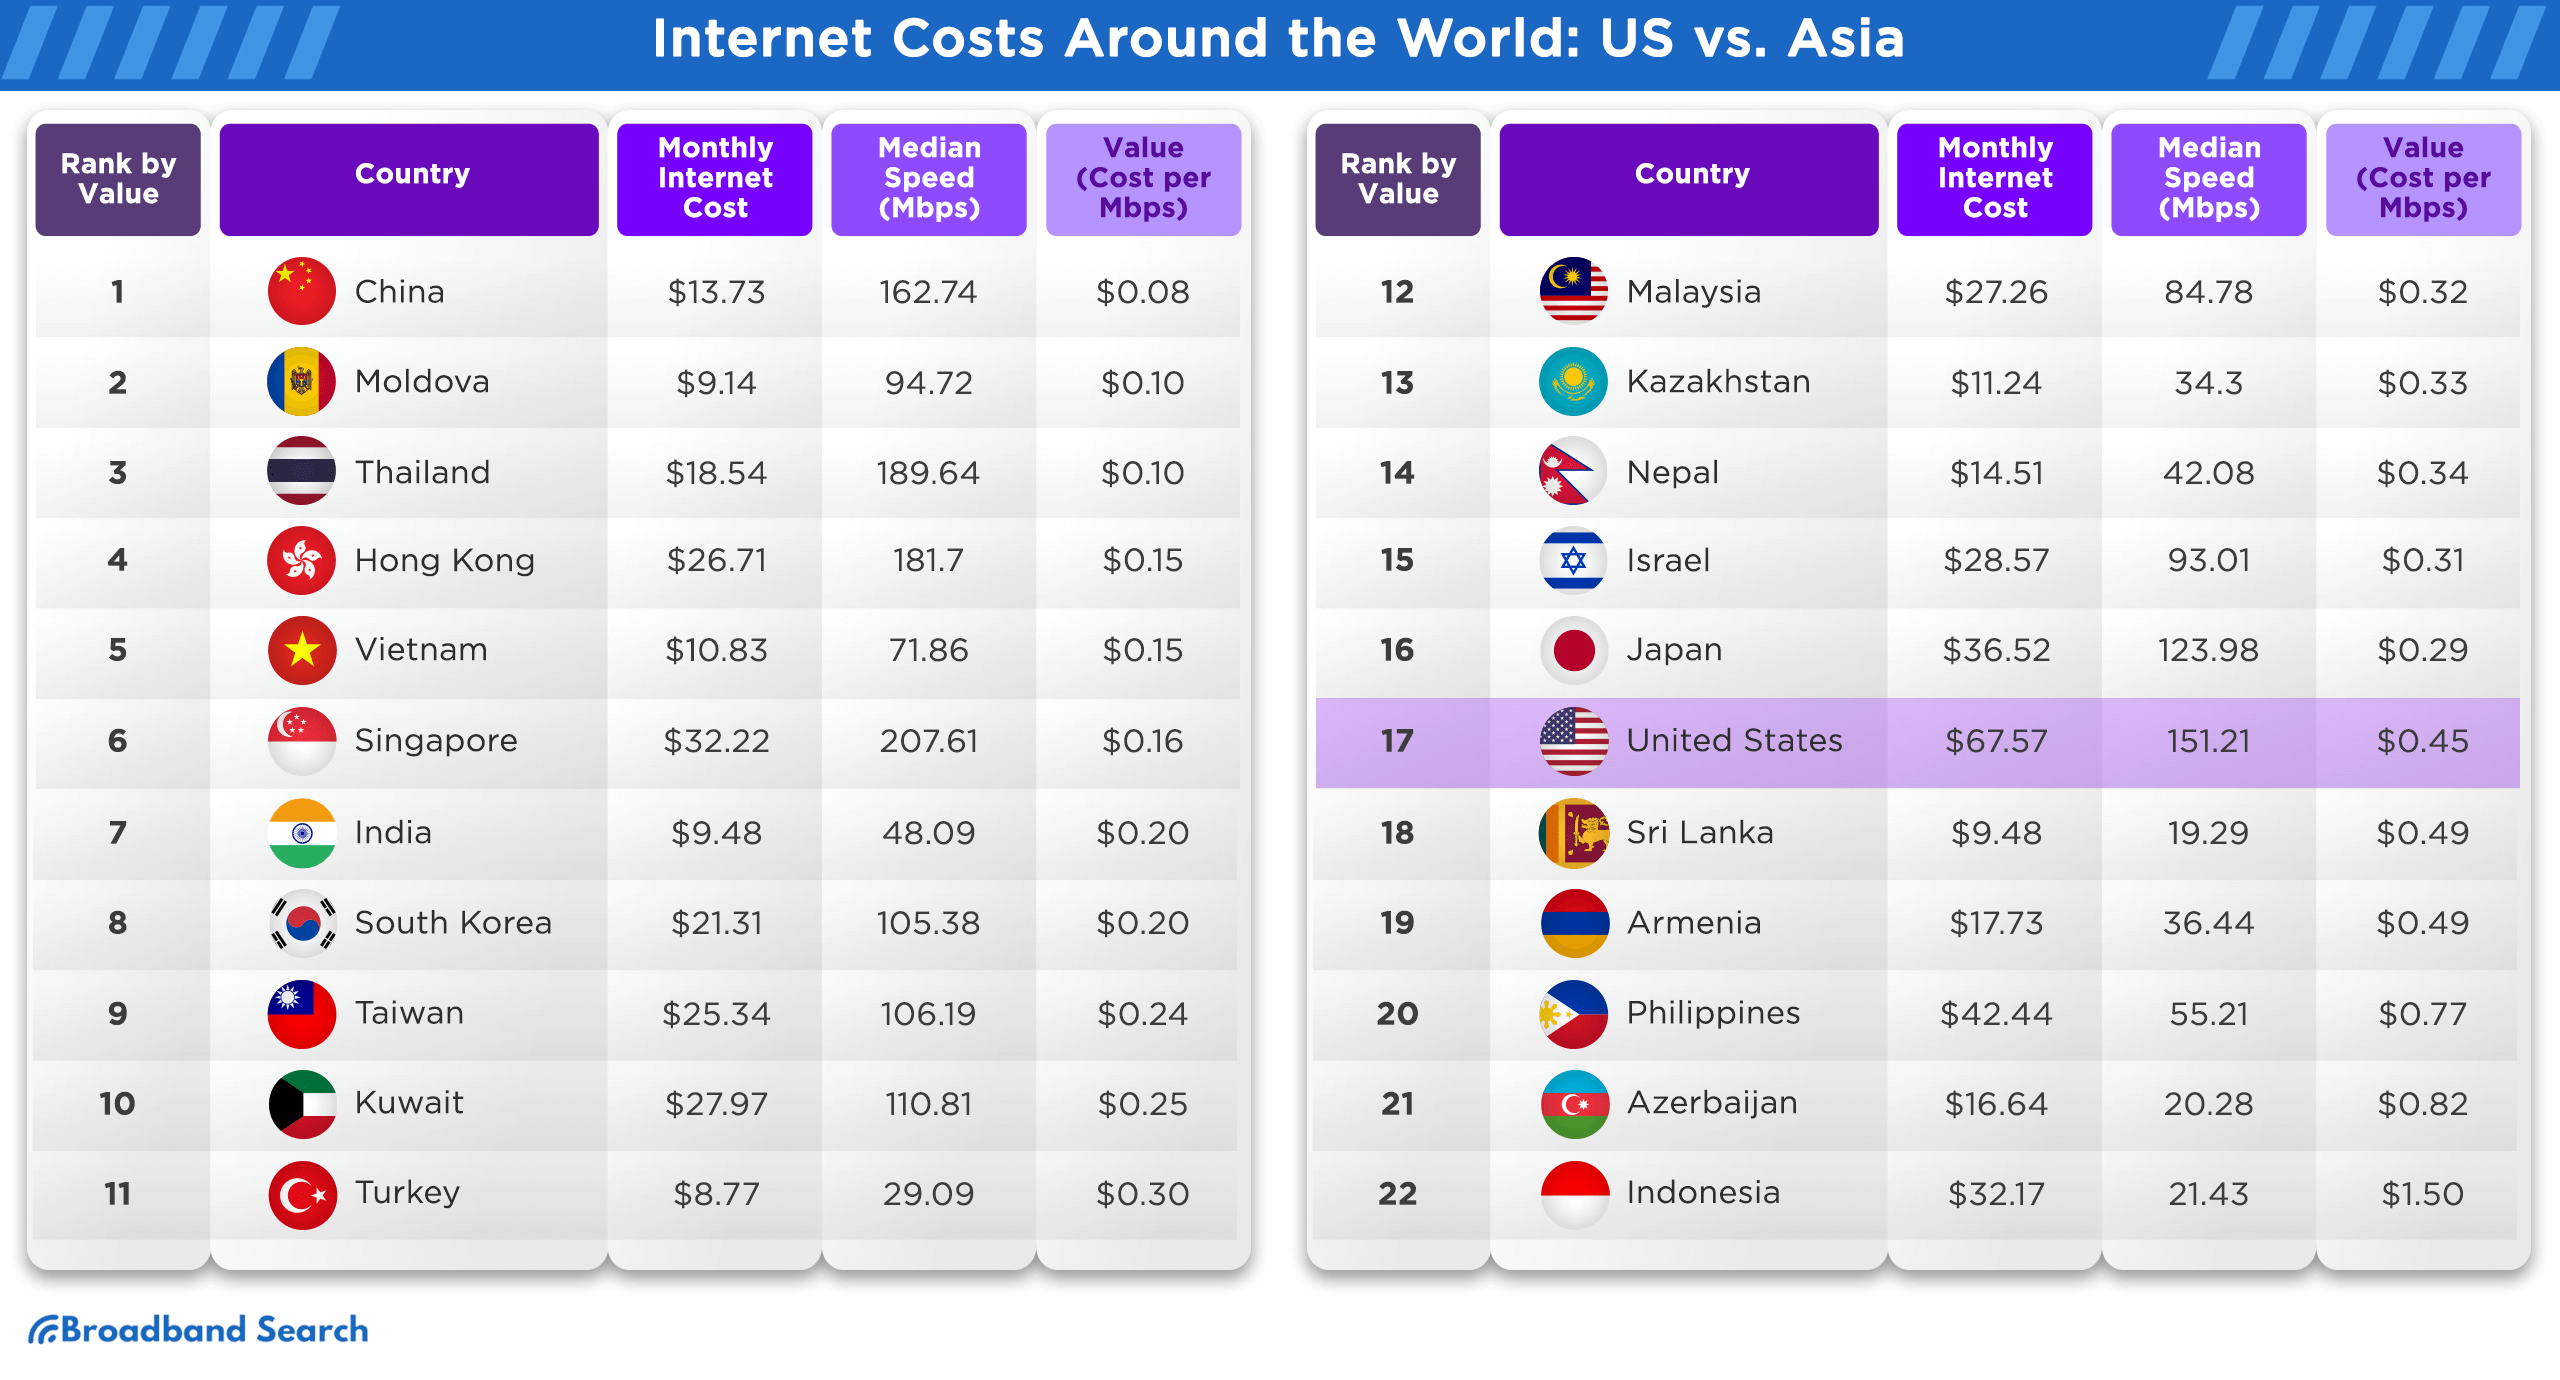 Comparison of internet costs between the US and countries located in Asia